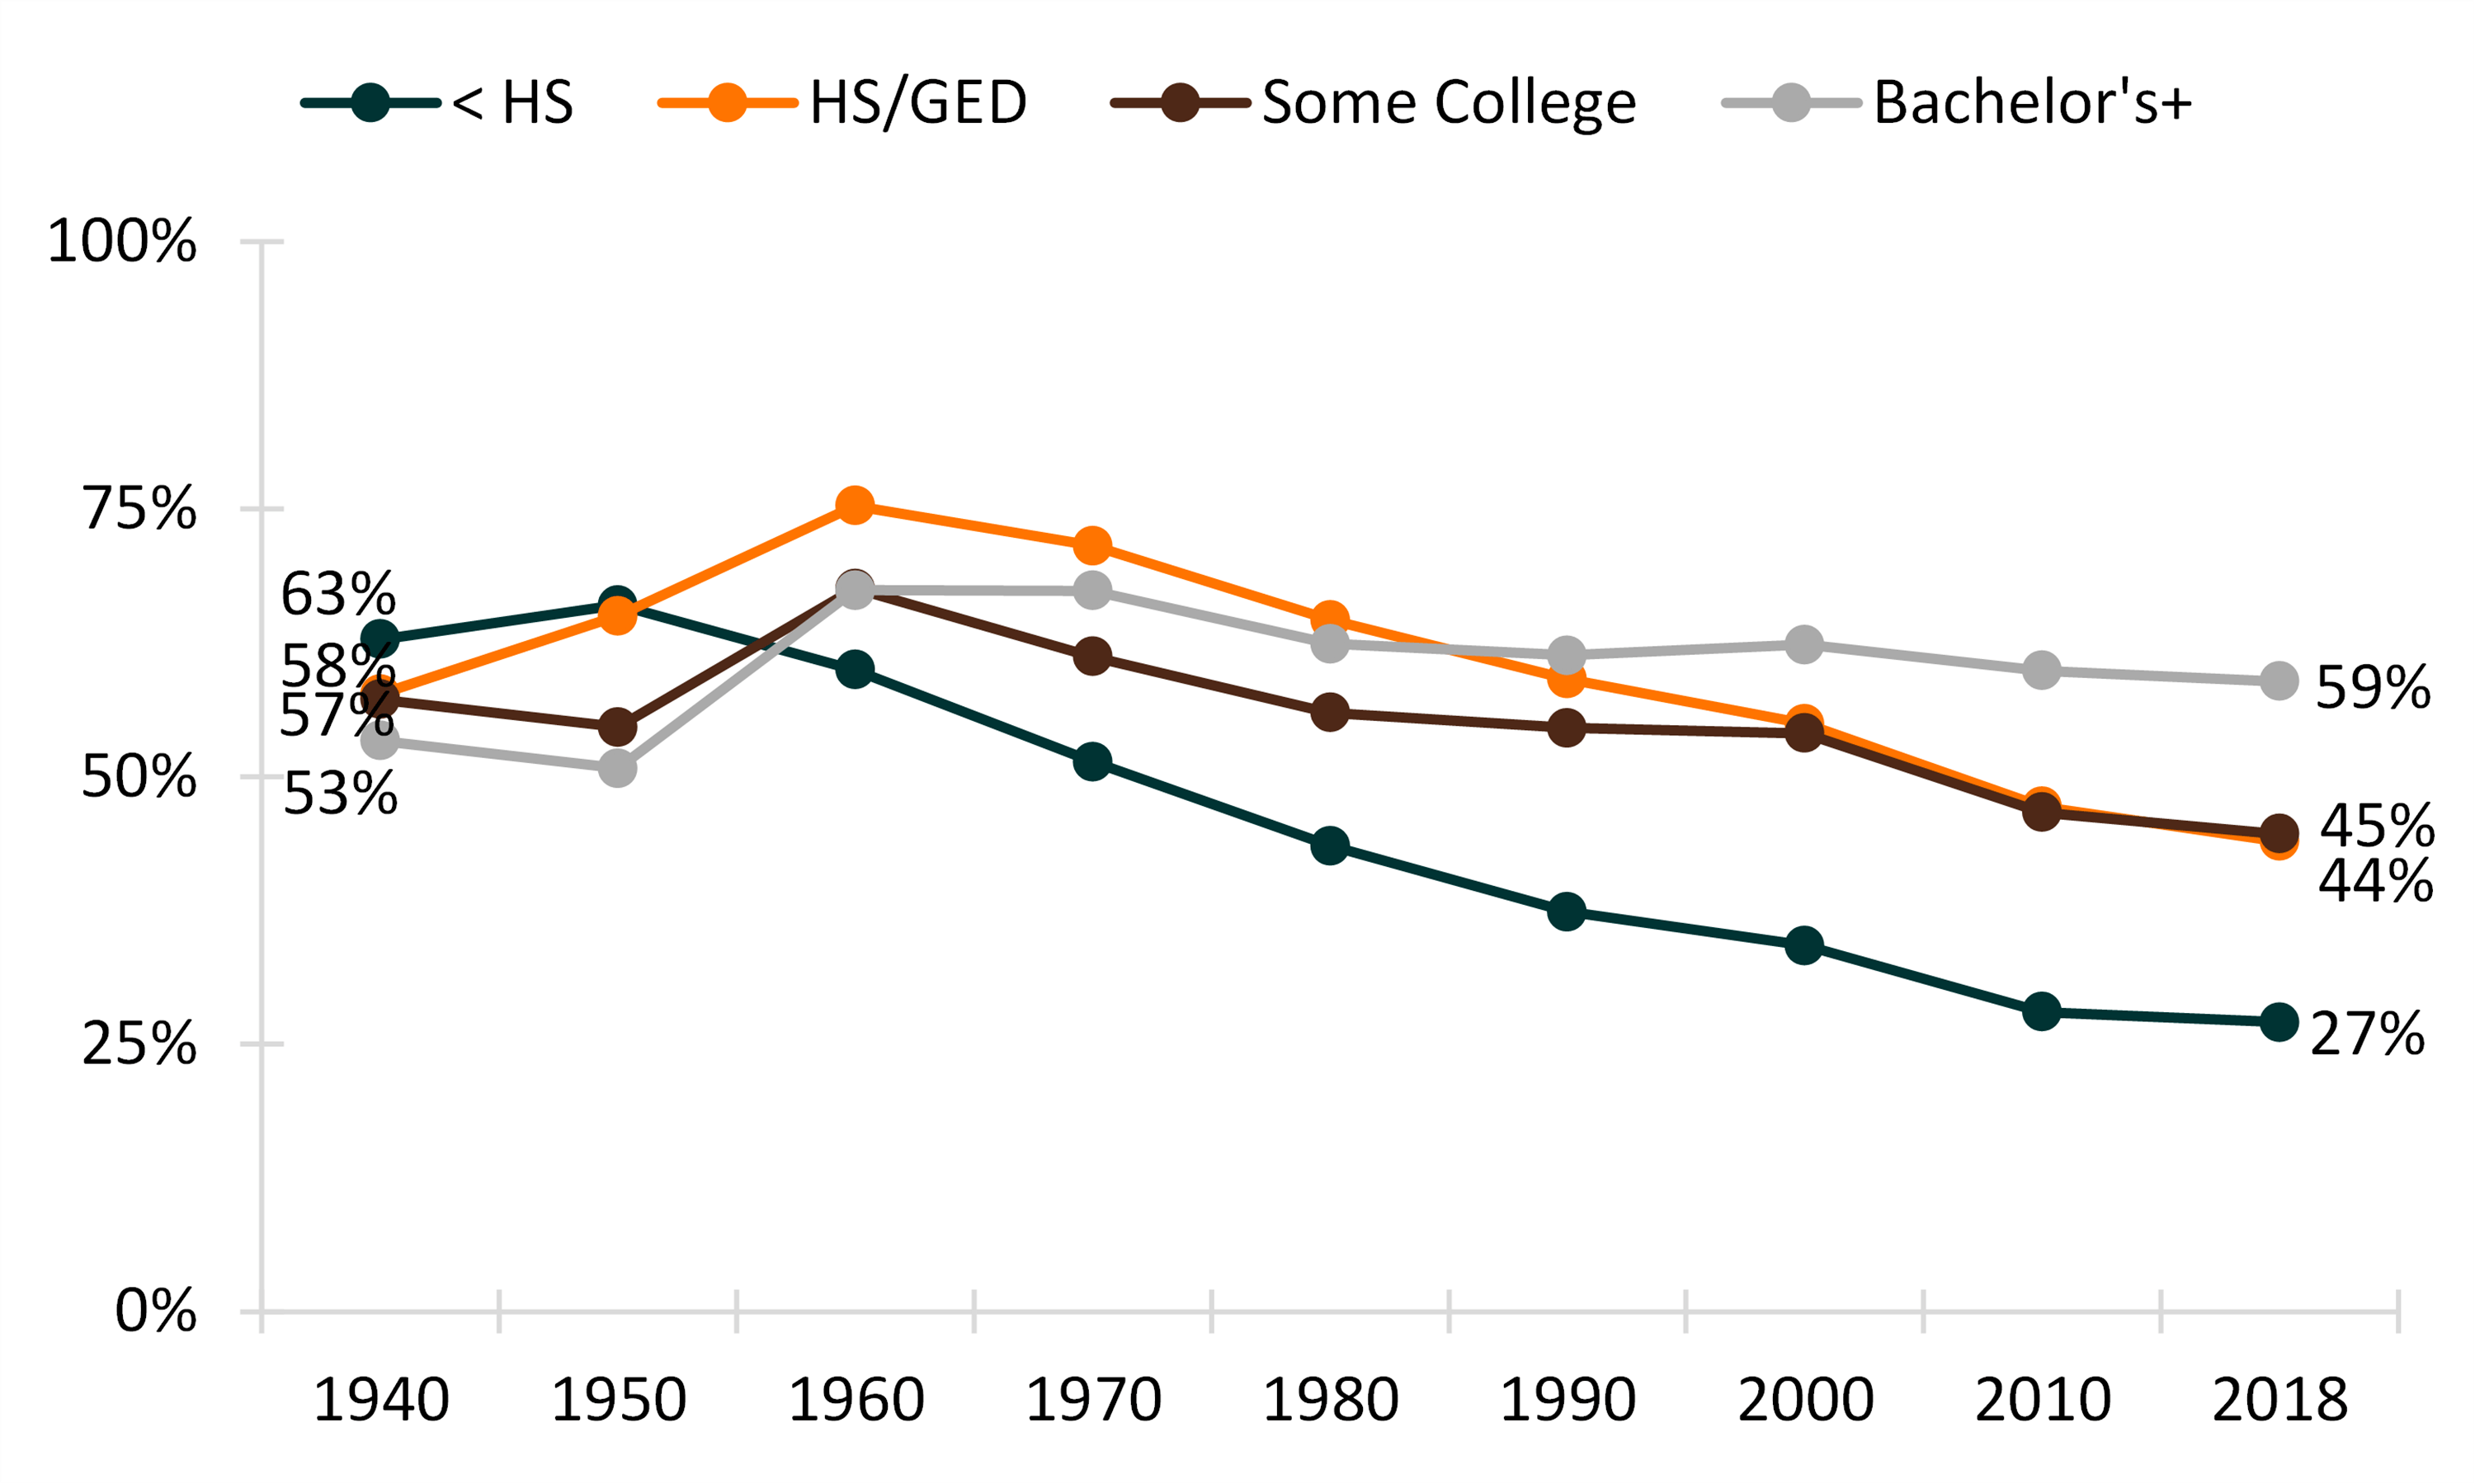 4-color line chart comparing Figure 4. Percentage of Women Currently Married Among Educational Attainment Groups, 1940-2018